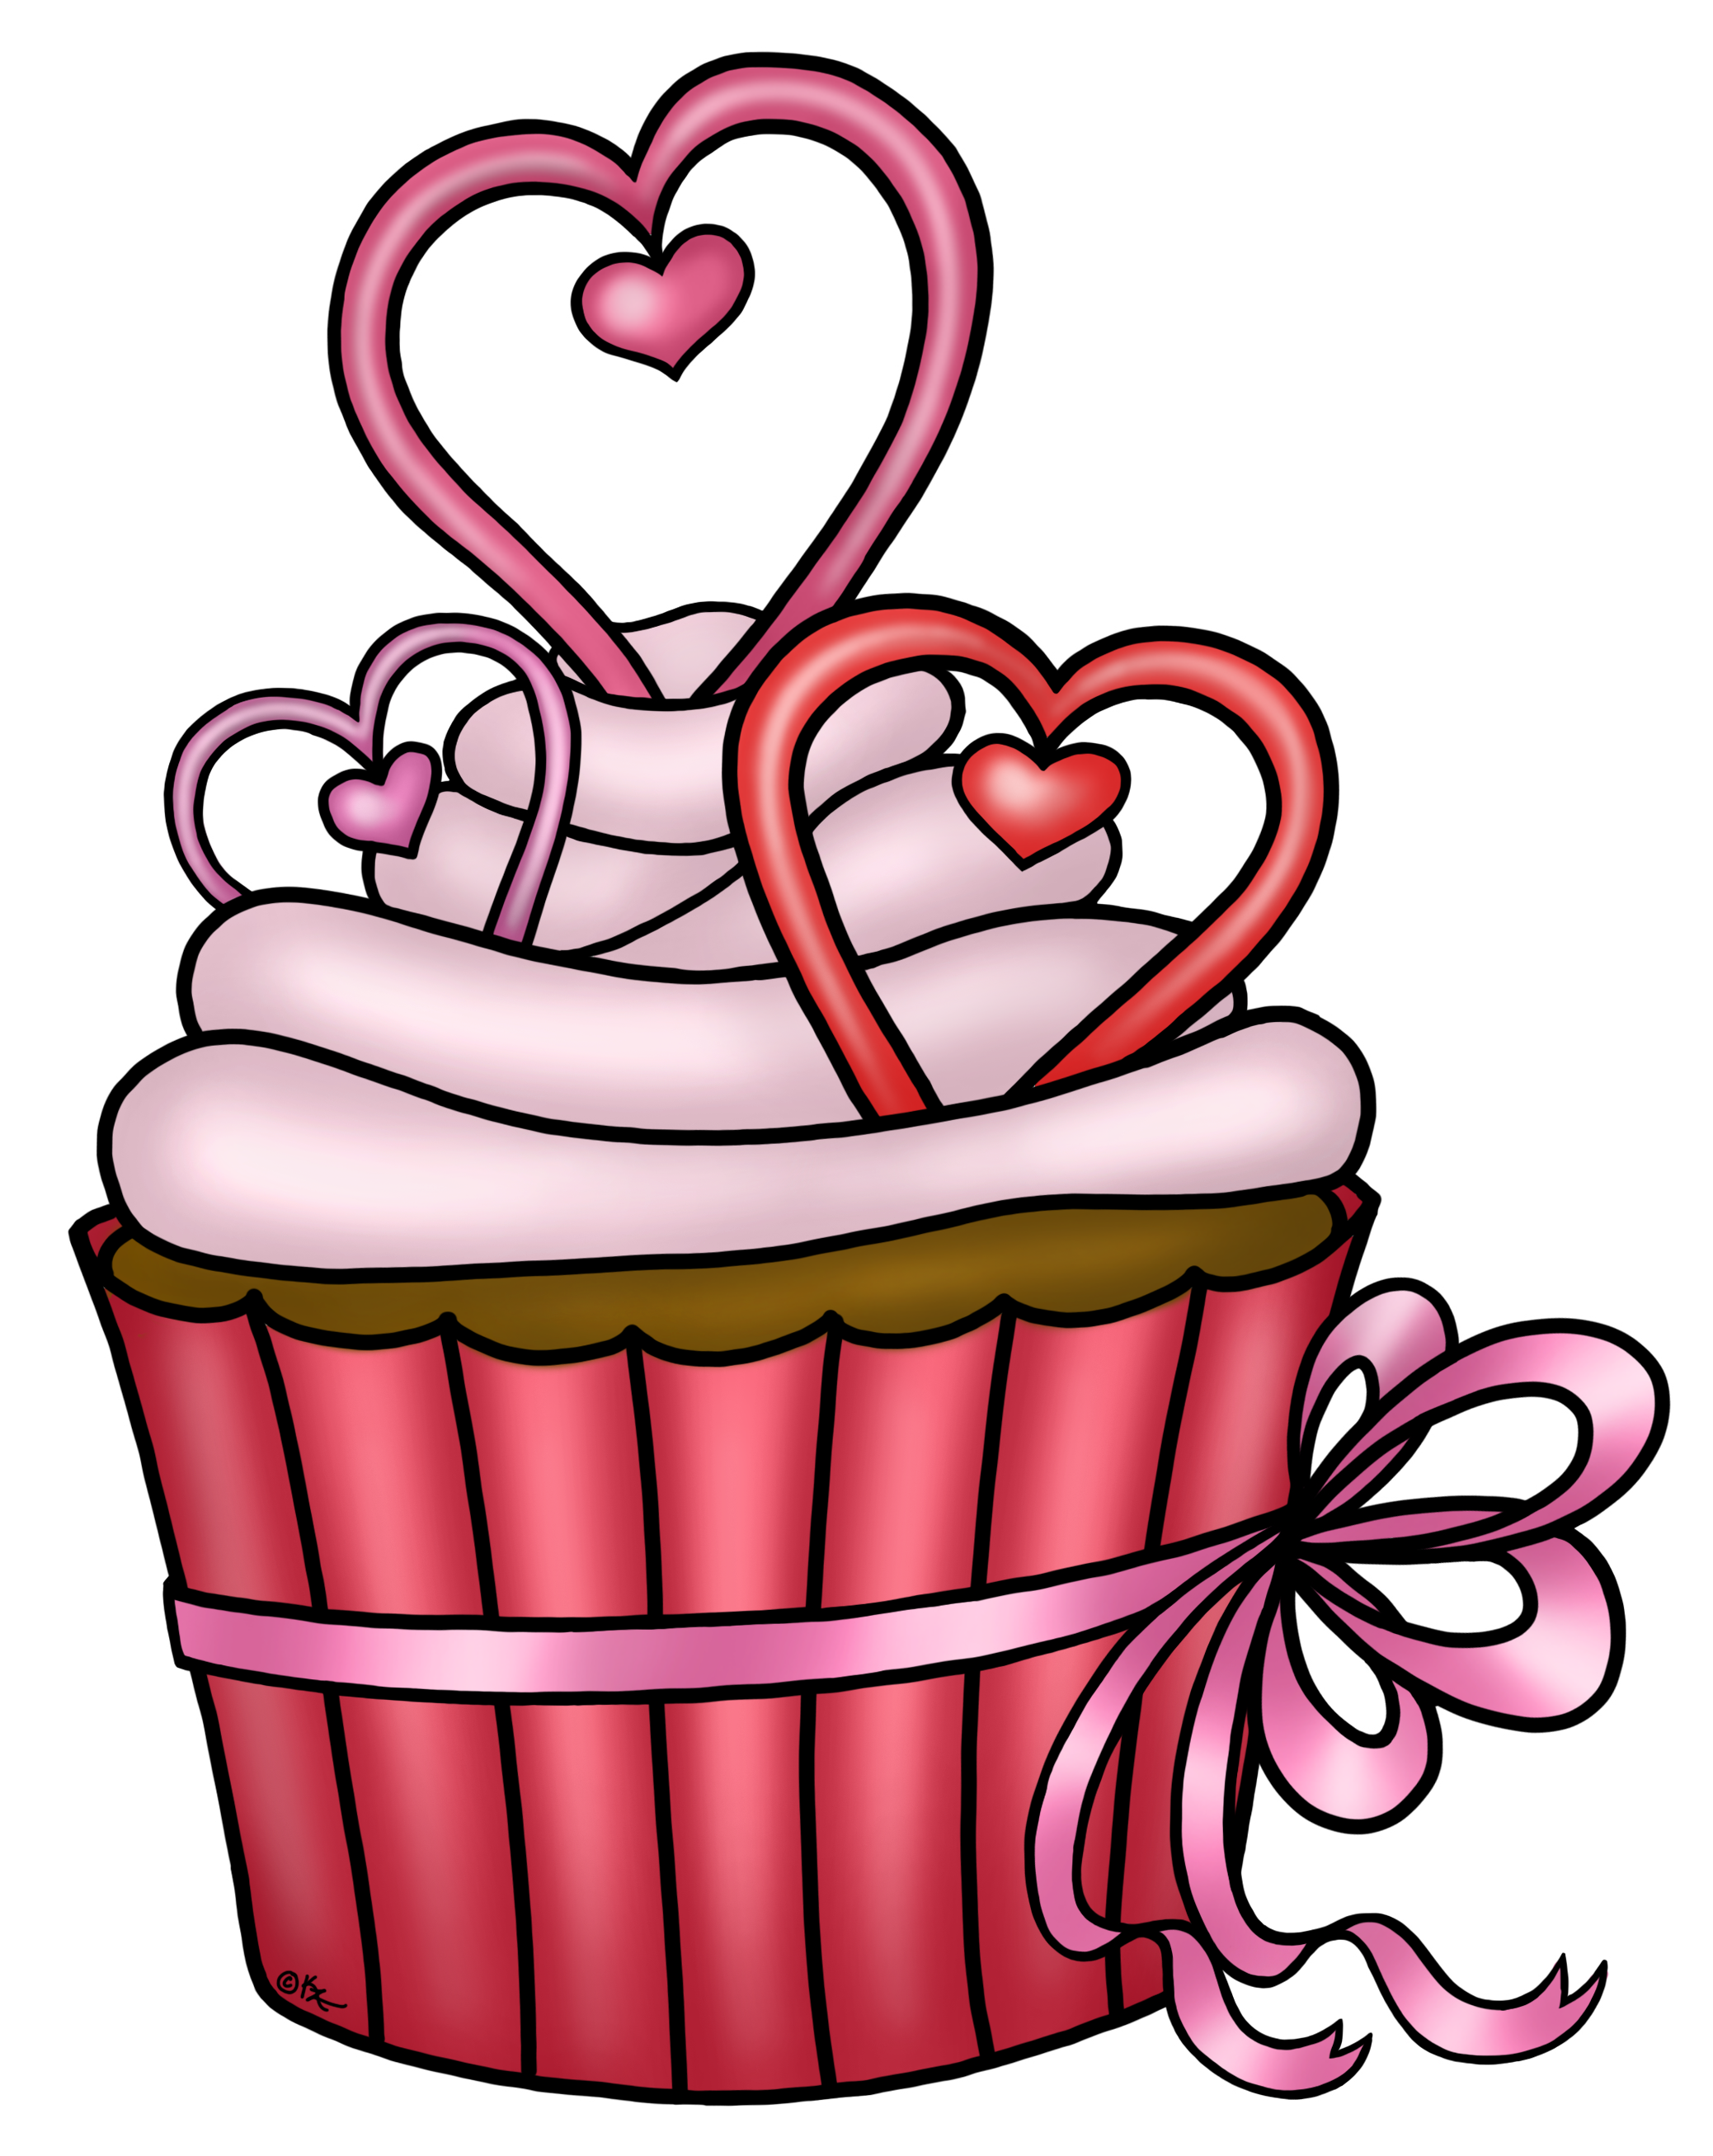 free clipart images cupcakes - photo #49